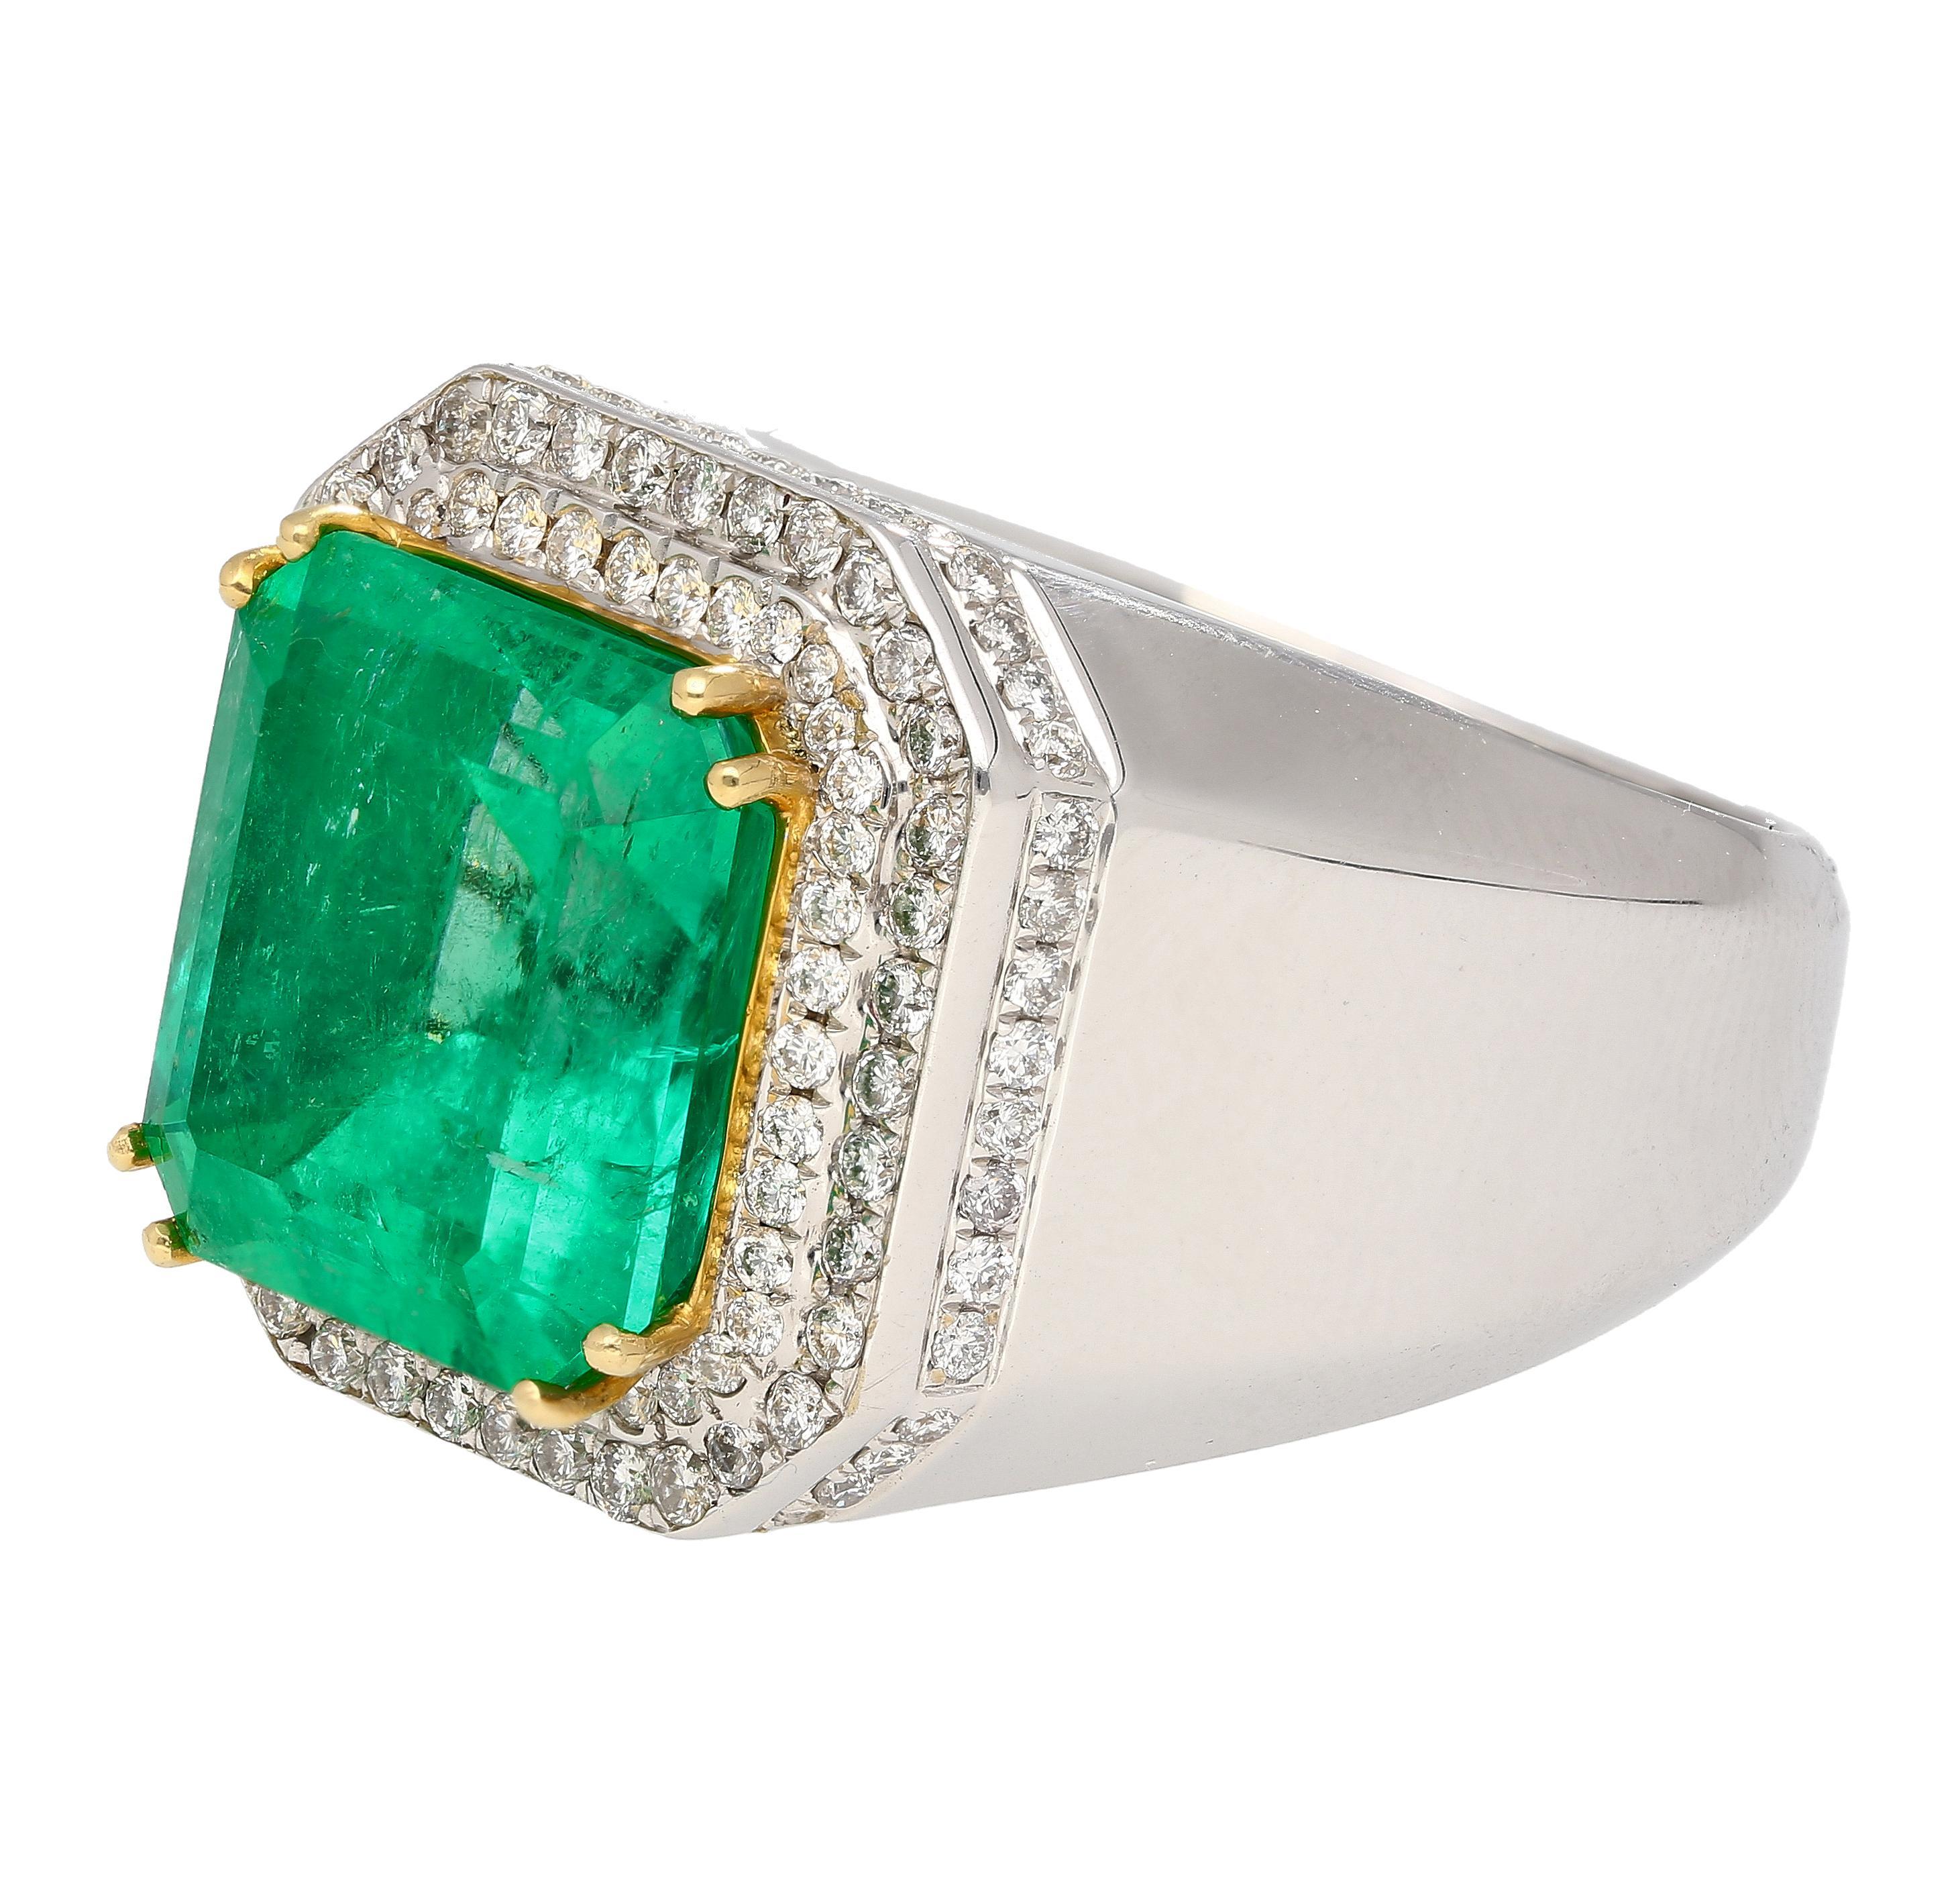 Emerald Cut GRS 9.54 Carat Colombian Emerald Insignificant Oil and Diamond Halo Mens Ring For Sale